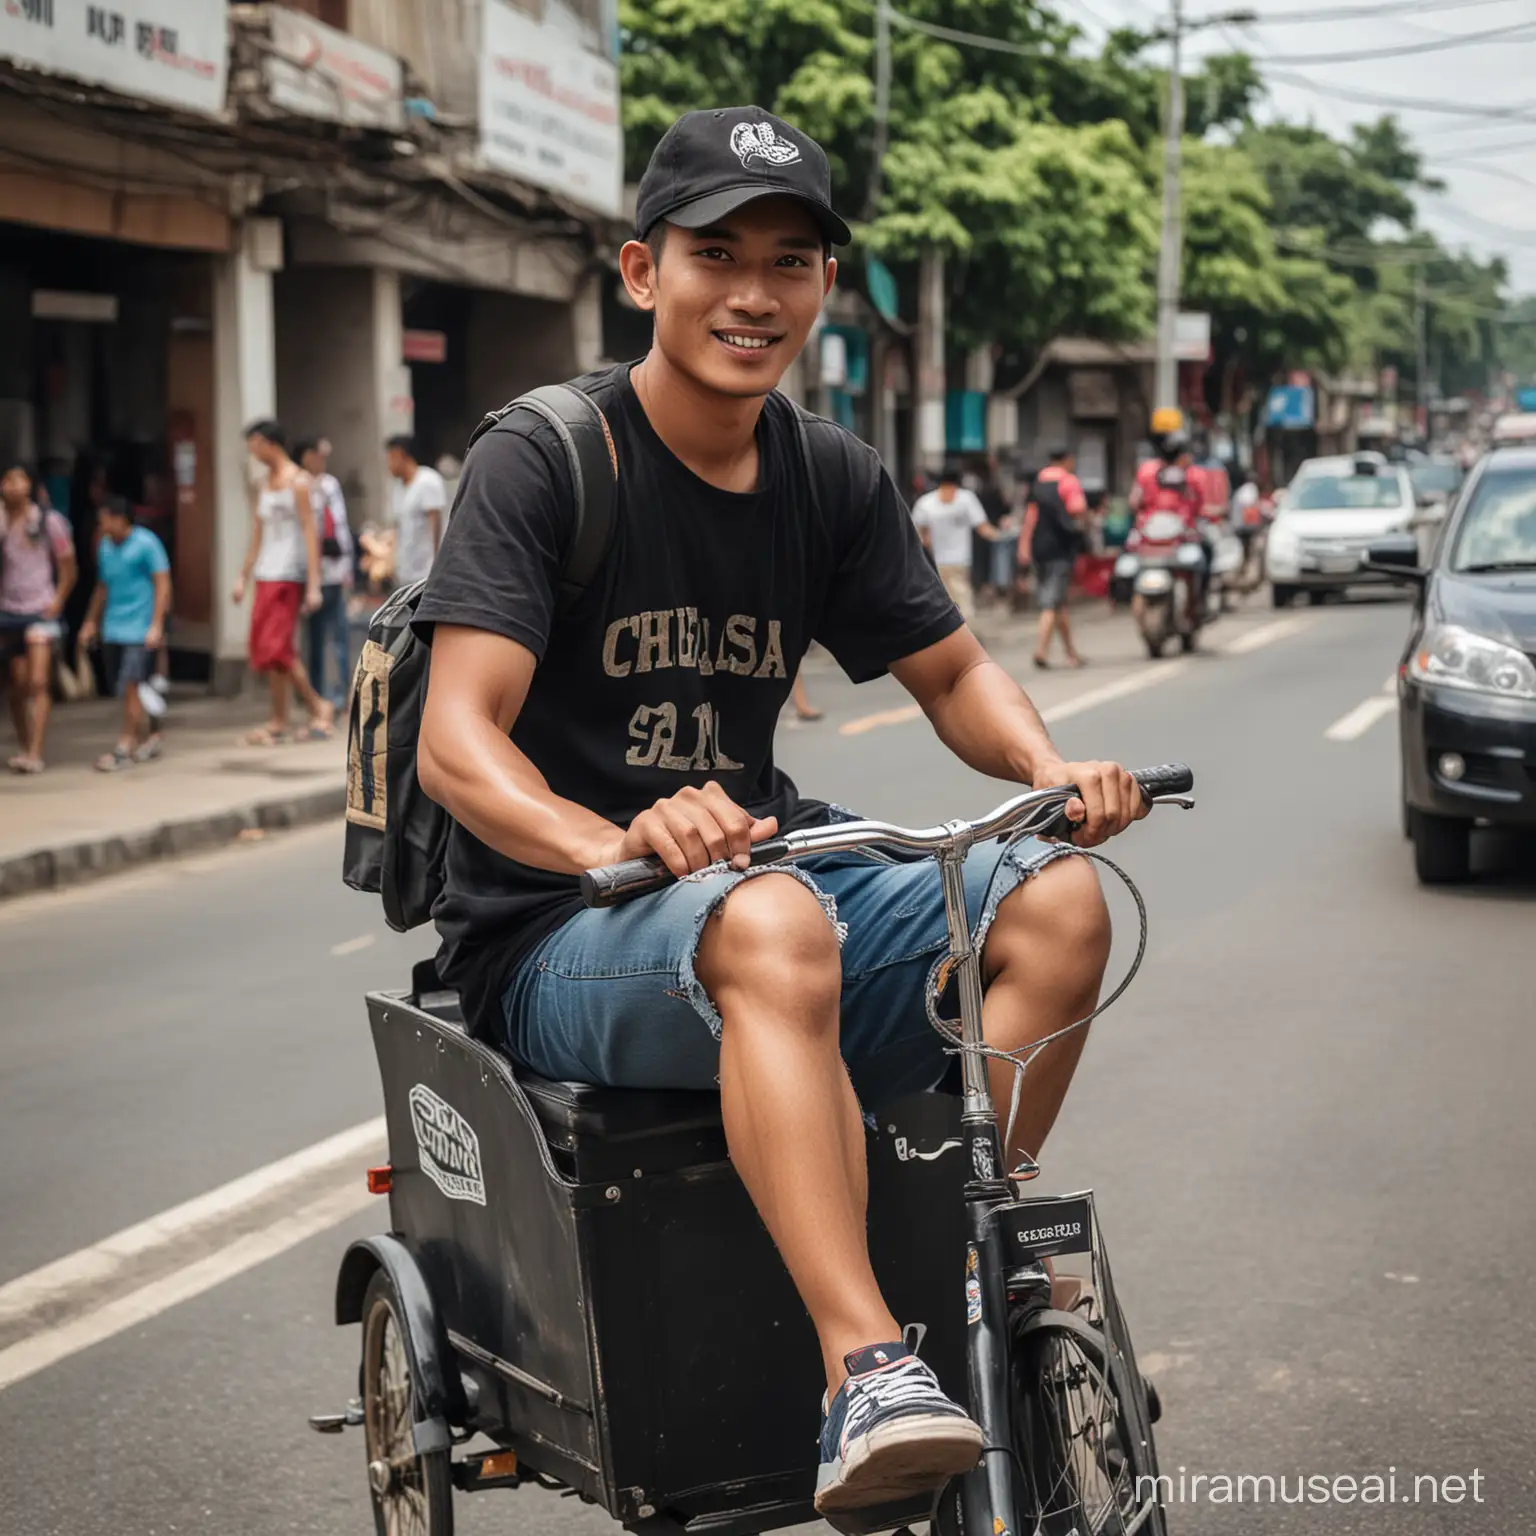 a handsome Indonesian man with a clean and smooth face wearing a worn baseball cap and wearing a black Chelsea football shirt and wearing knee-length jeans shorts and flip-flops is riding a pedicab on a busy Bandung city highway, taken with a DSLR camera.